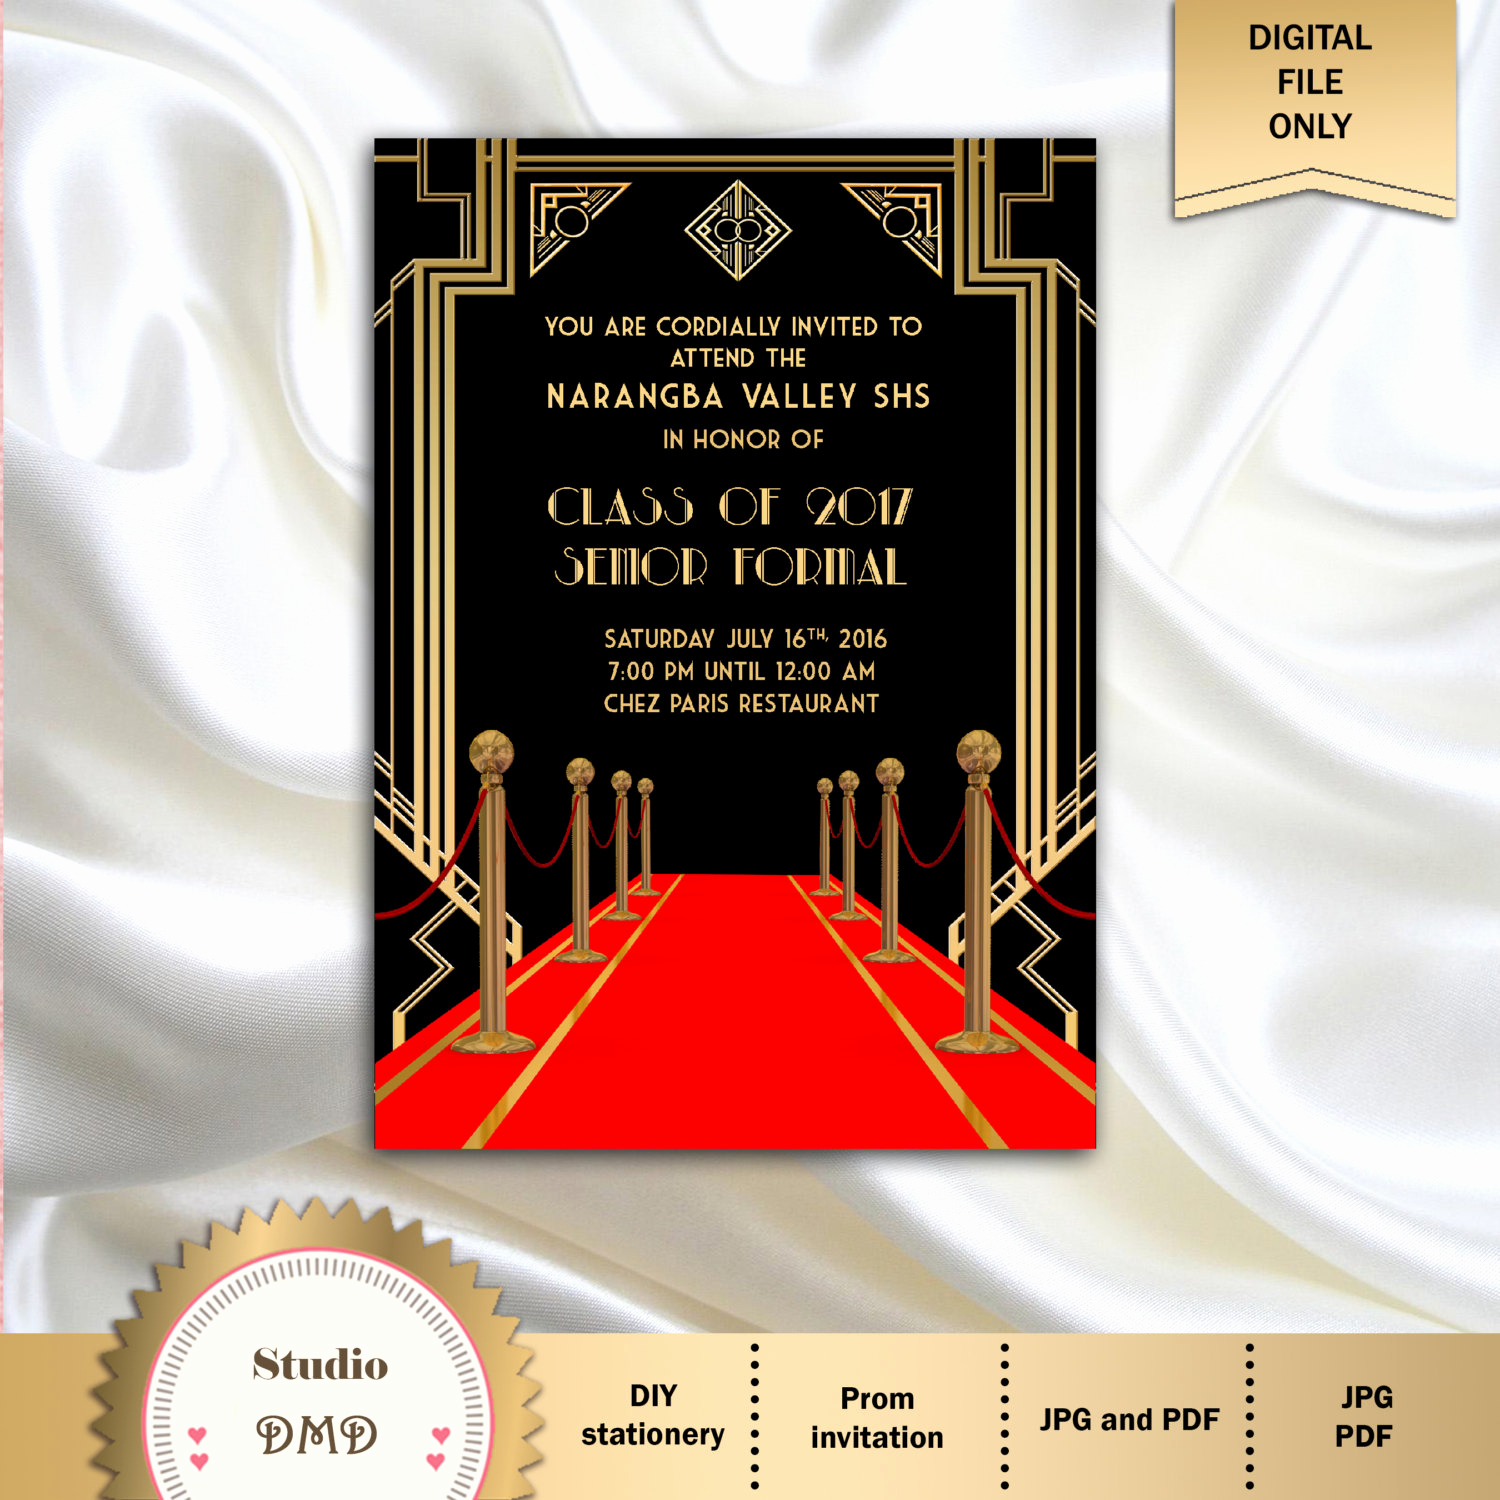 Great Gatsby Prom Invitation Best Of Great Gatsby Style Art Deco Prom Invitation Red Carpet Prom